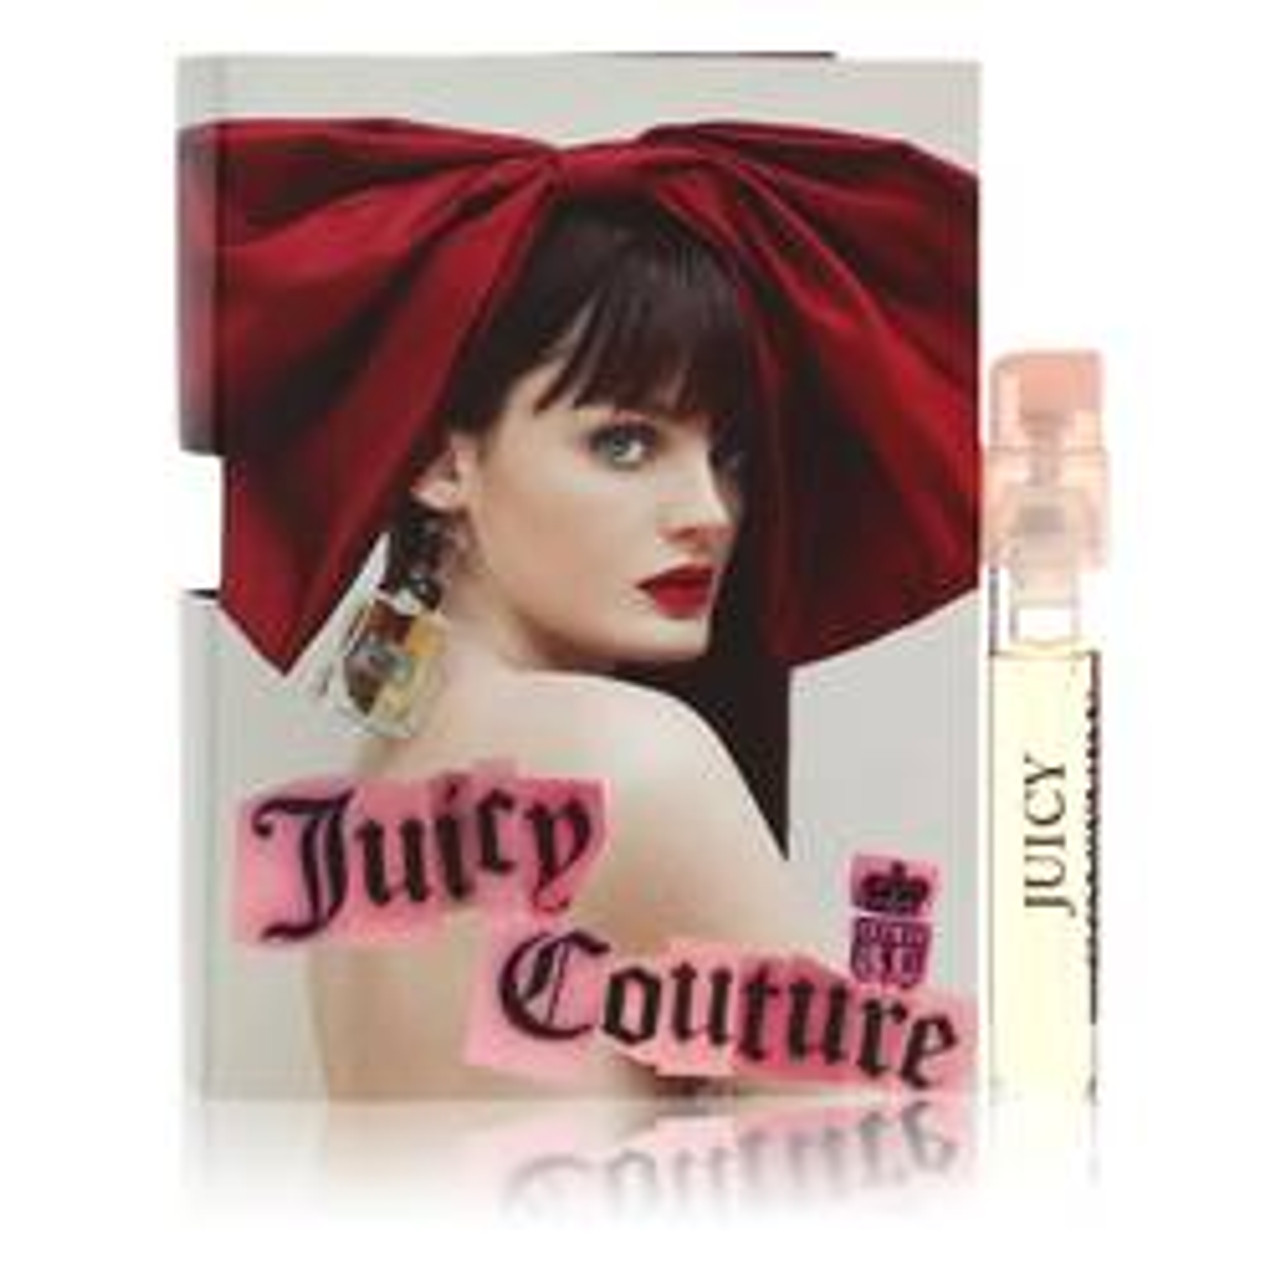 Juicy Couture Perfume By Juicy Couture Vial (sample) 0.03 oz for Women - [From 7.00 - Choose pk Qty ] - *Ships from Miami